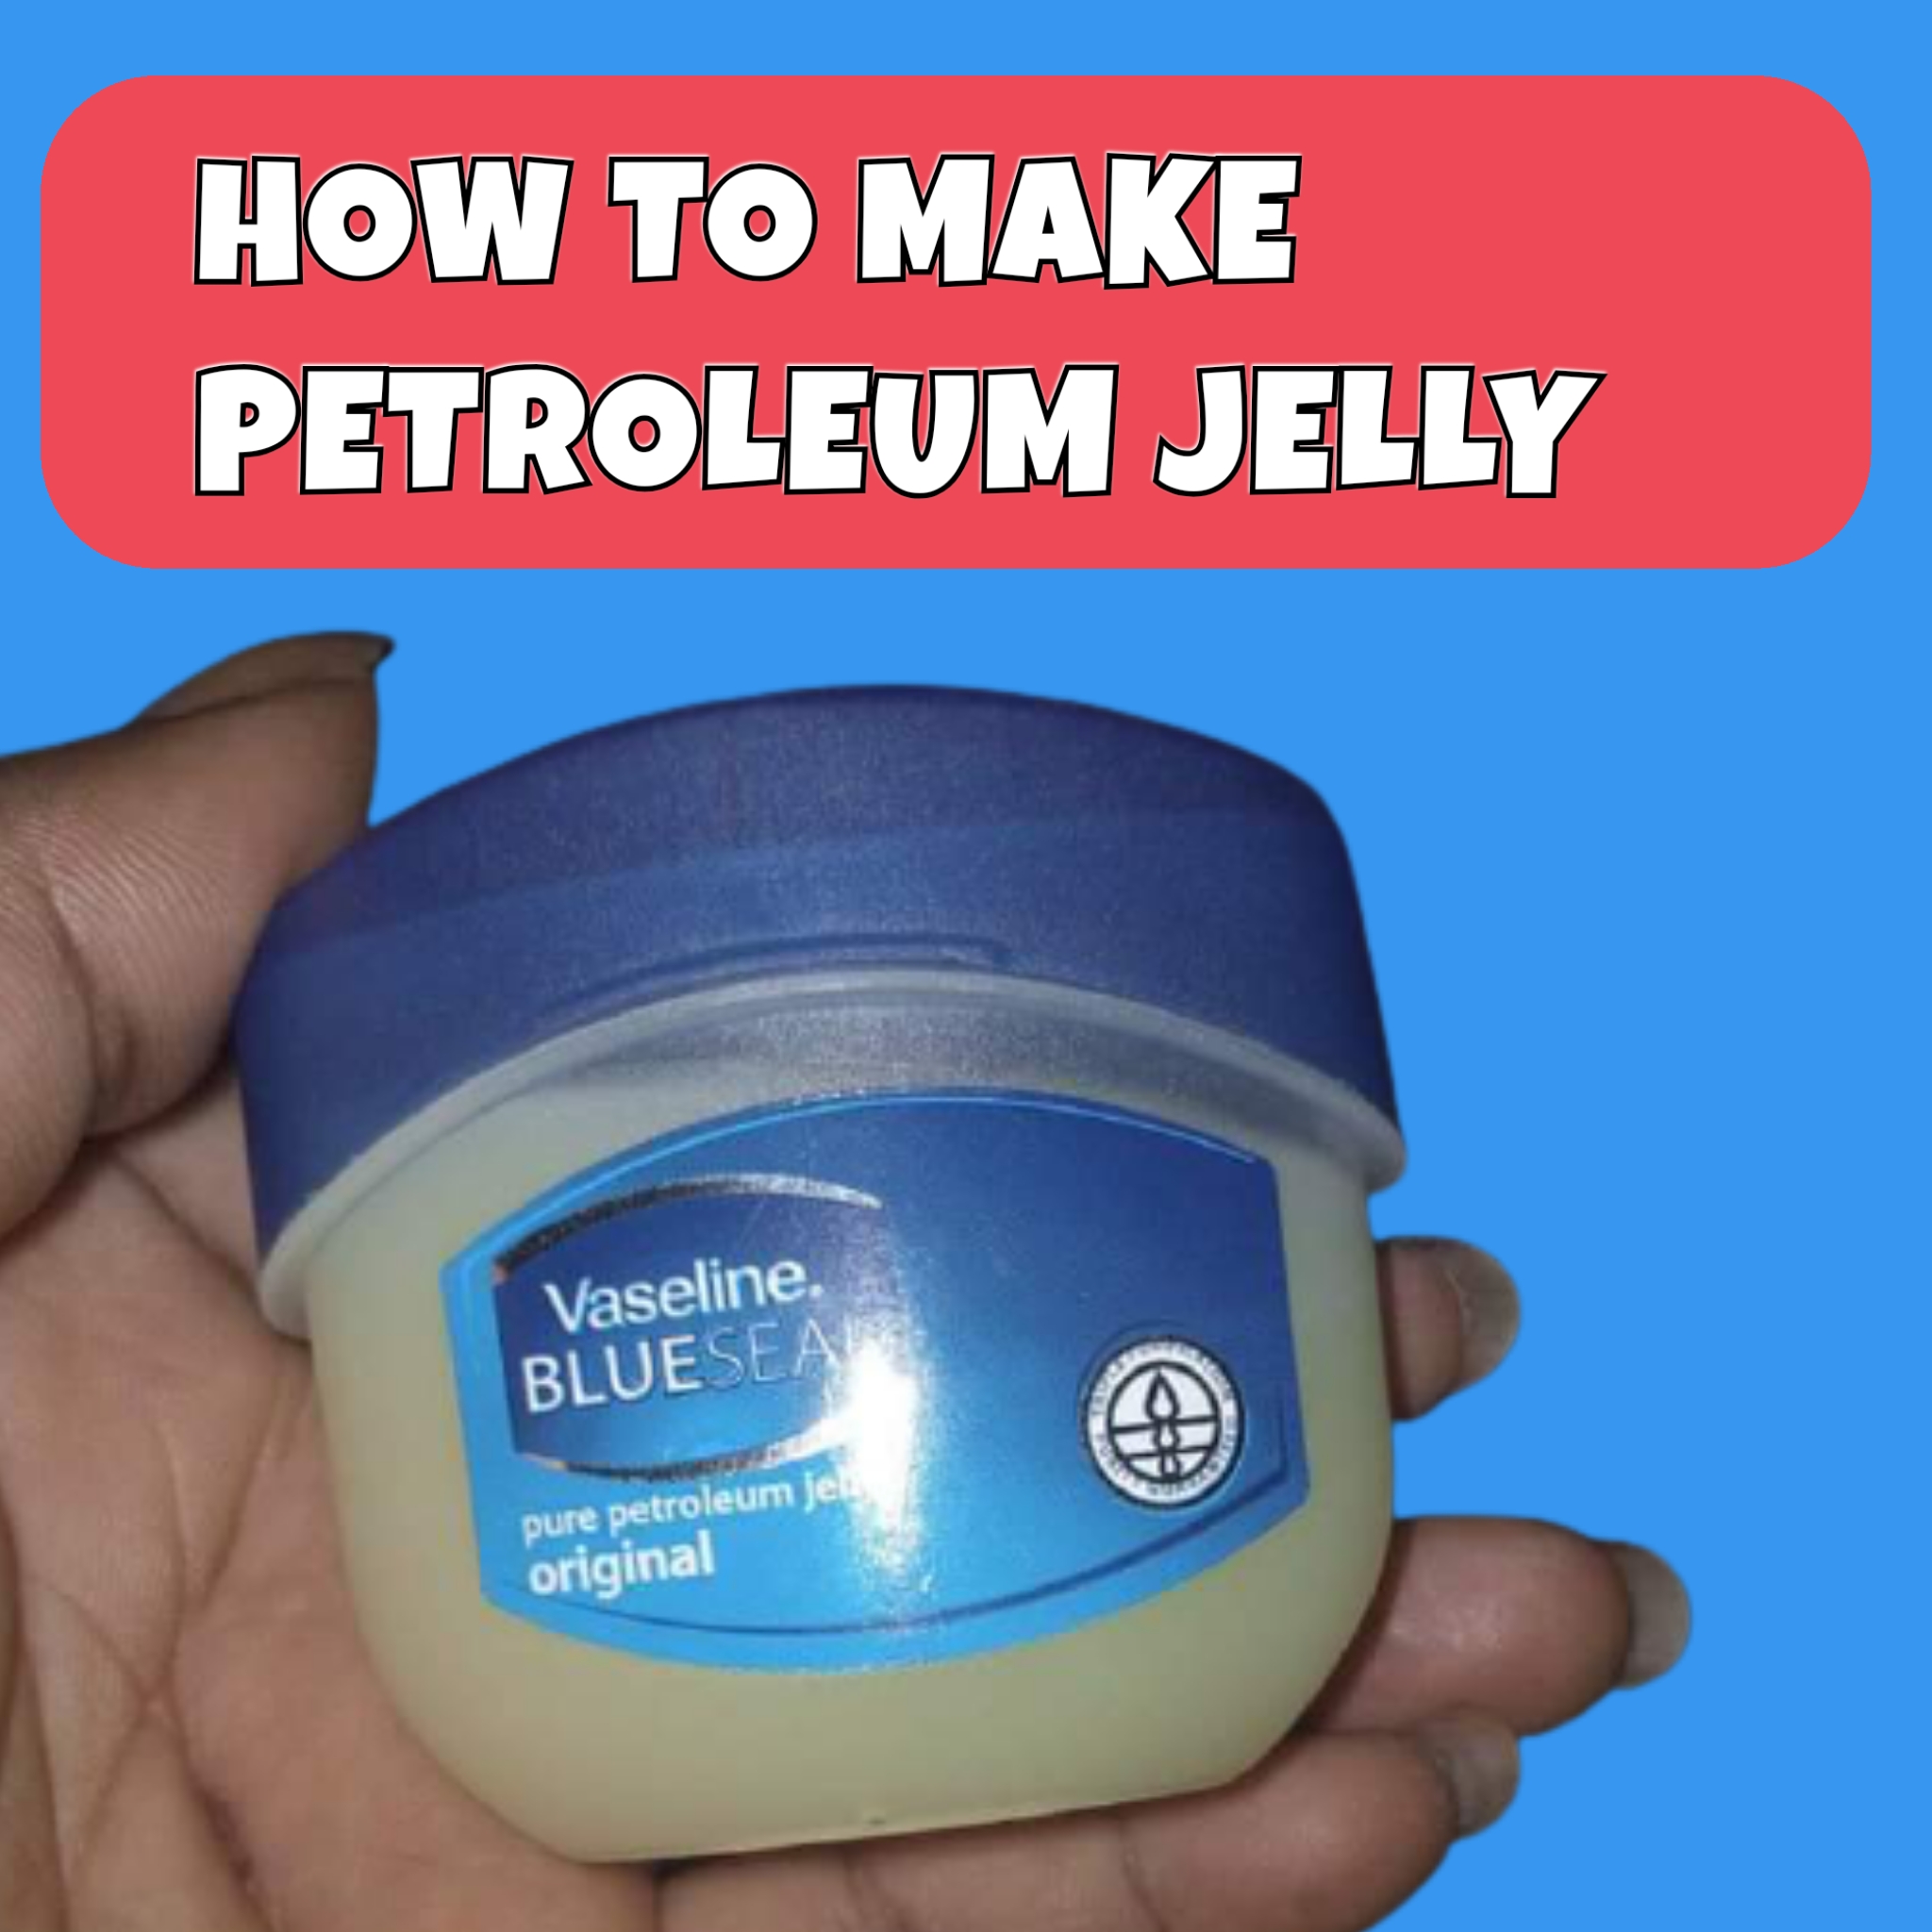 HOW TO MAKE PETROLEUM JELLY